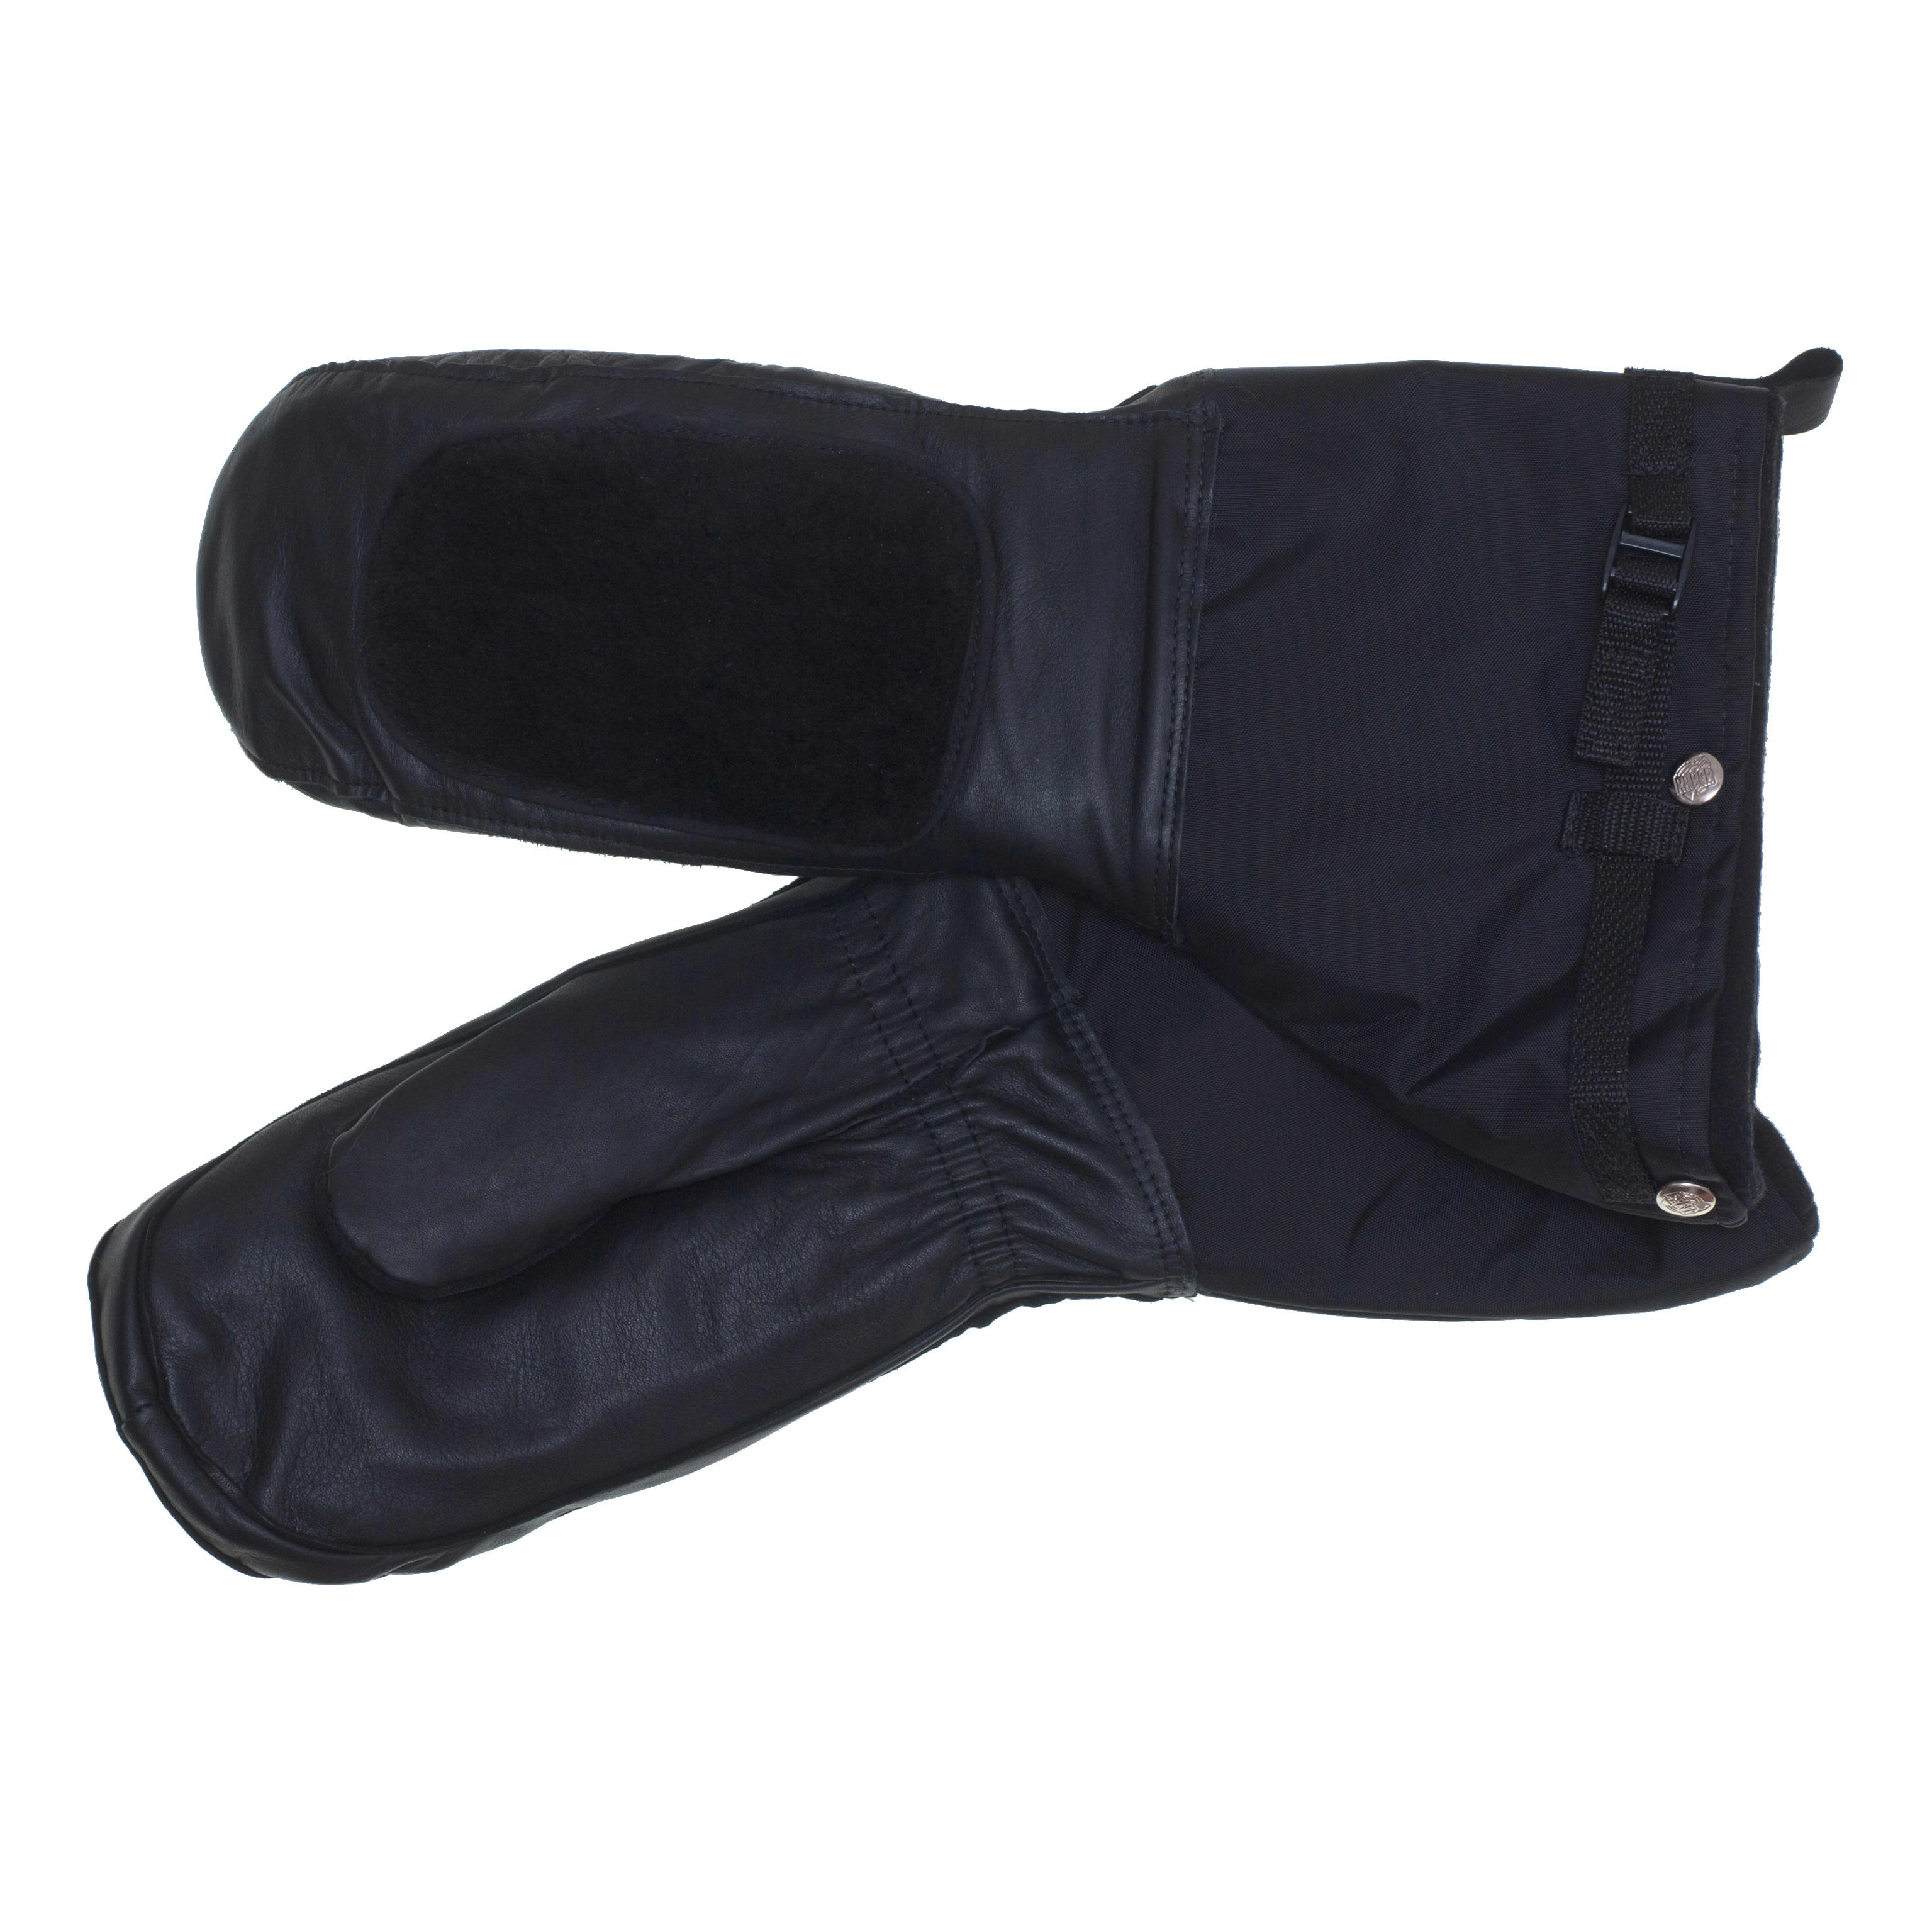 Raber HY-Arctic Extreme Gauntlet Mitt - Military Issue for Arctic Use - Black